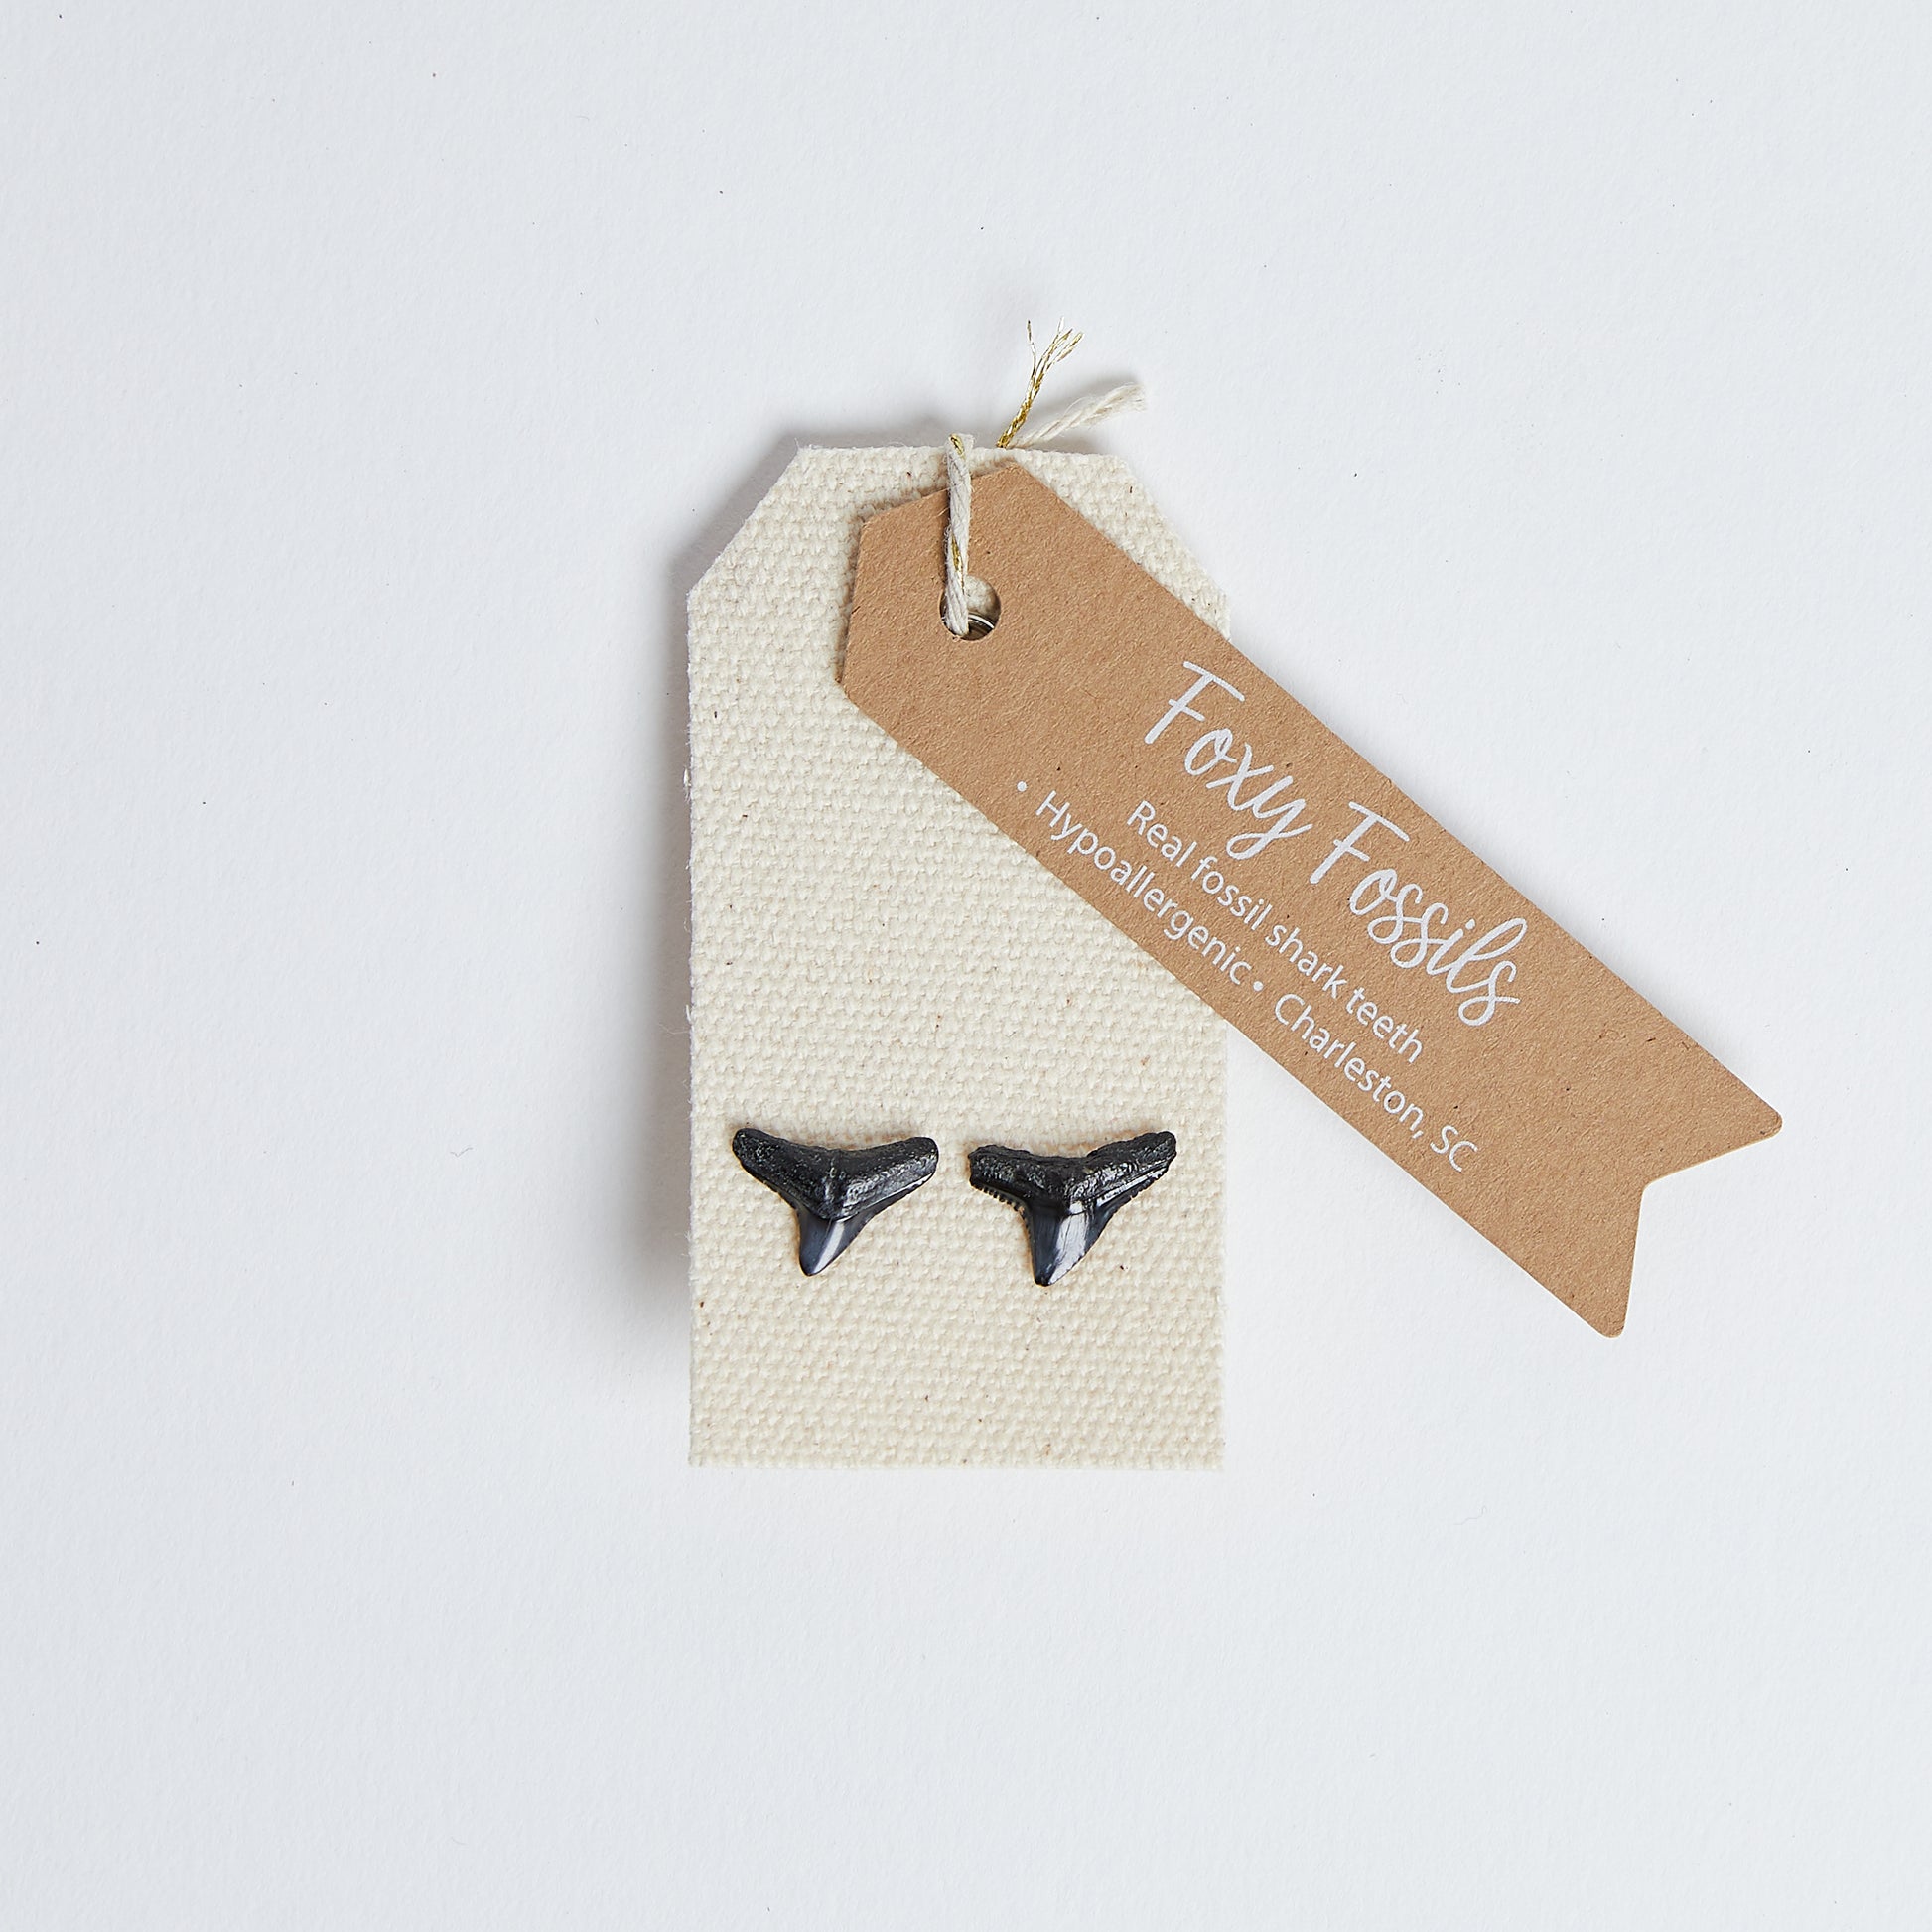 Natural Shark Tooth Stud Earrings - Foxy Fossils real fossil shark teeth stud earrings 